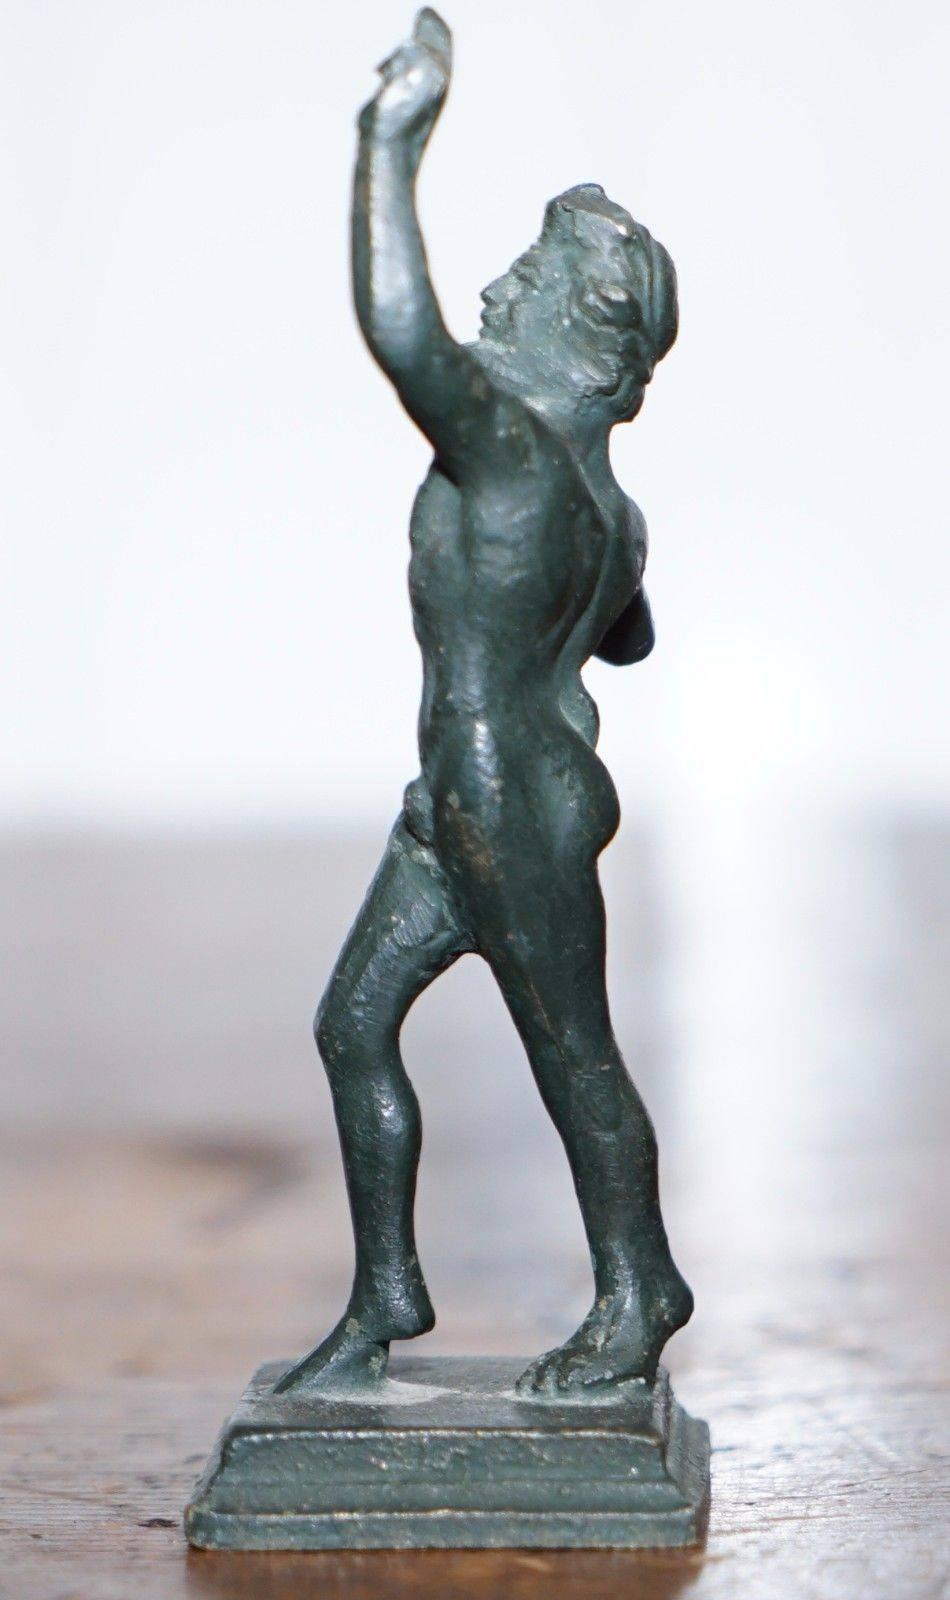 Hand-Crafted Rare Miniature Very Early Bronze Statue of the Dancing Faun Grand Tour Piece